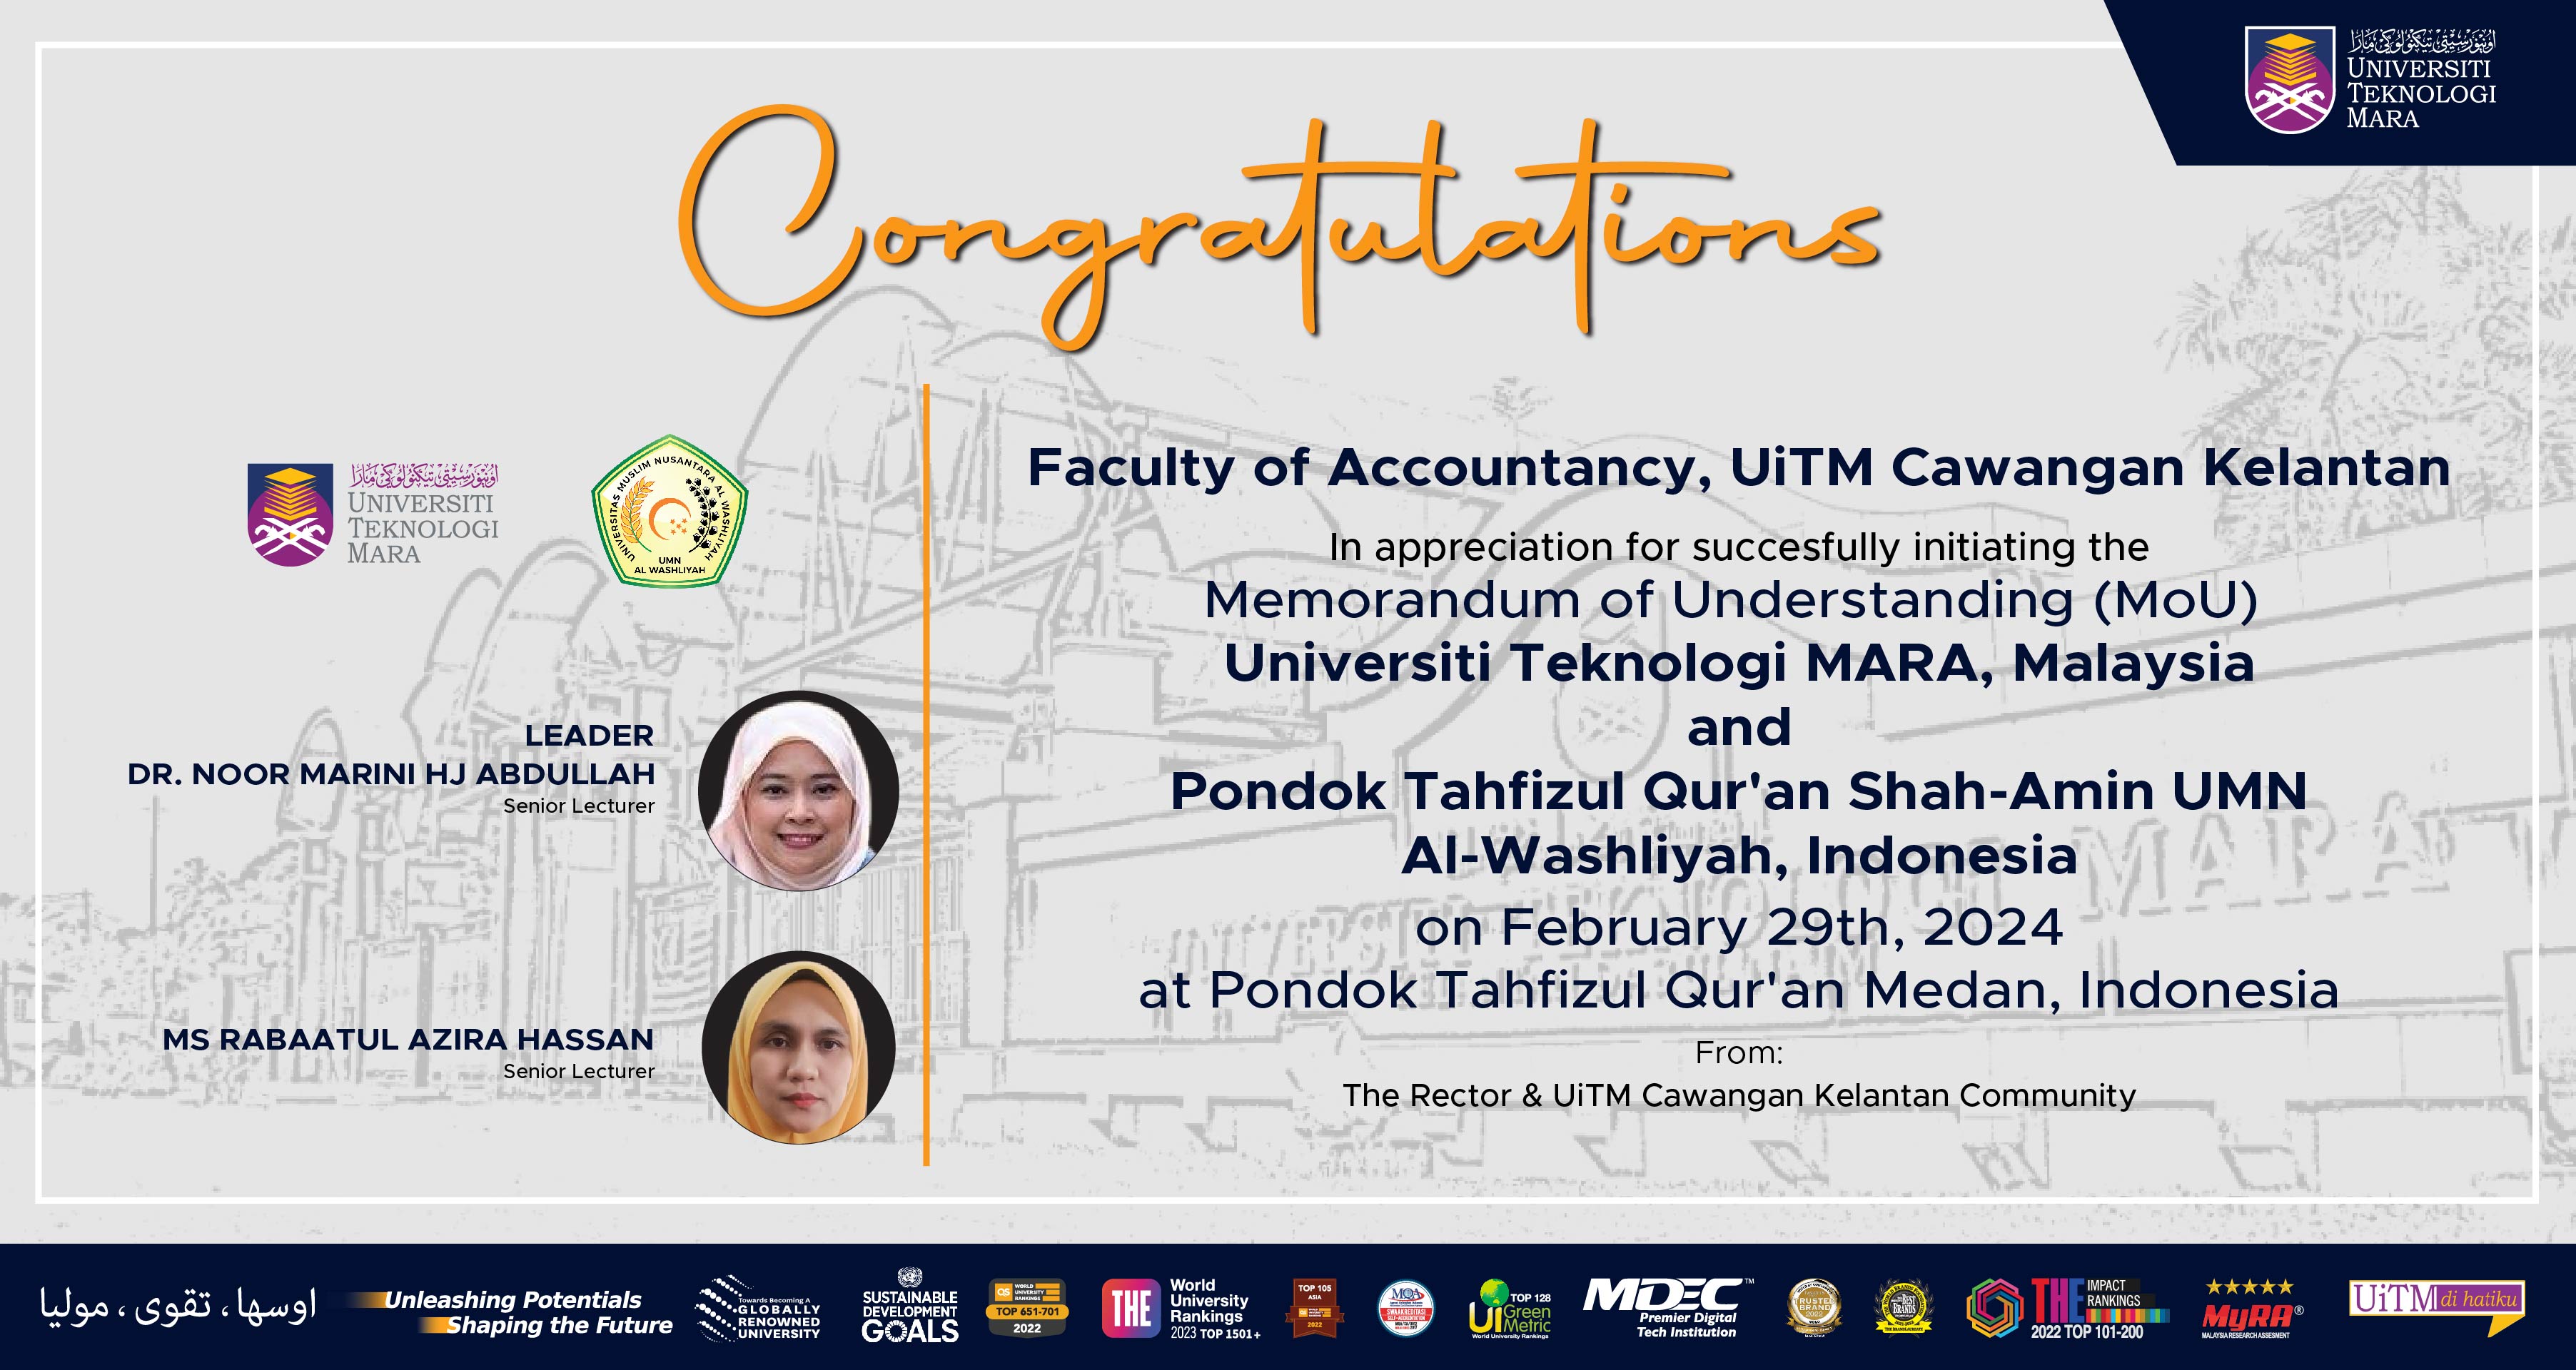 Congratulations!!! Dr Noor Marini Hj Abdullah and Puan Rabaatul Azira Hassan, Faculty of Accountancy, UiTMCK in appreciation for successfully initiating the MoU UiTM, Malaysia and Pondok Tahfizul Qur'an Shah-Amin UMN Al-Washliyah, Indonesia